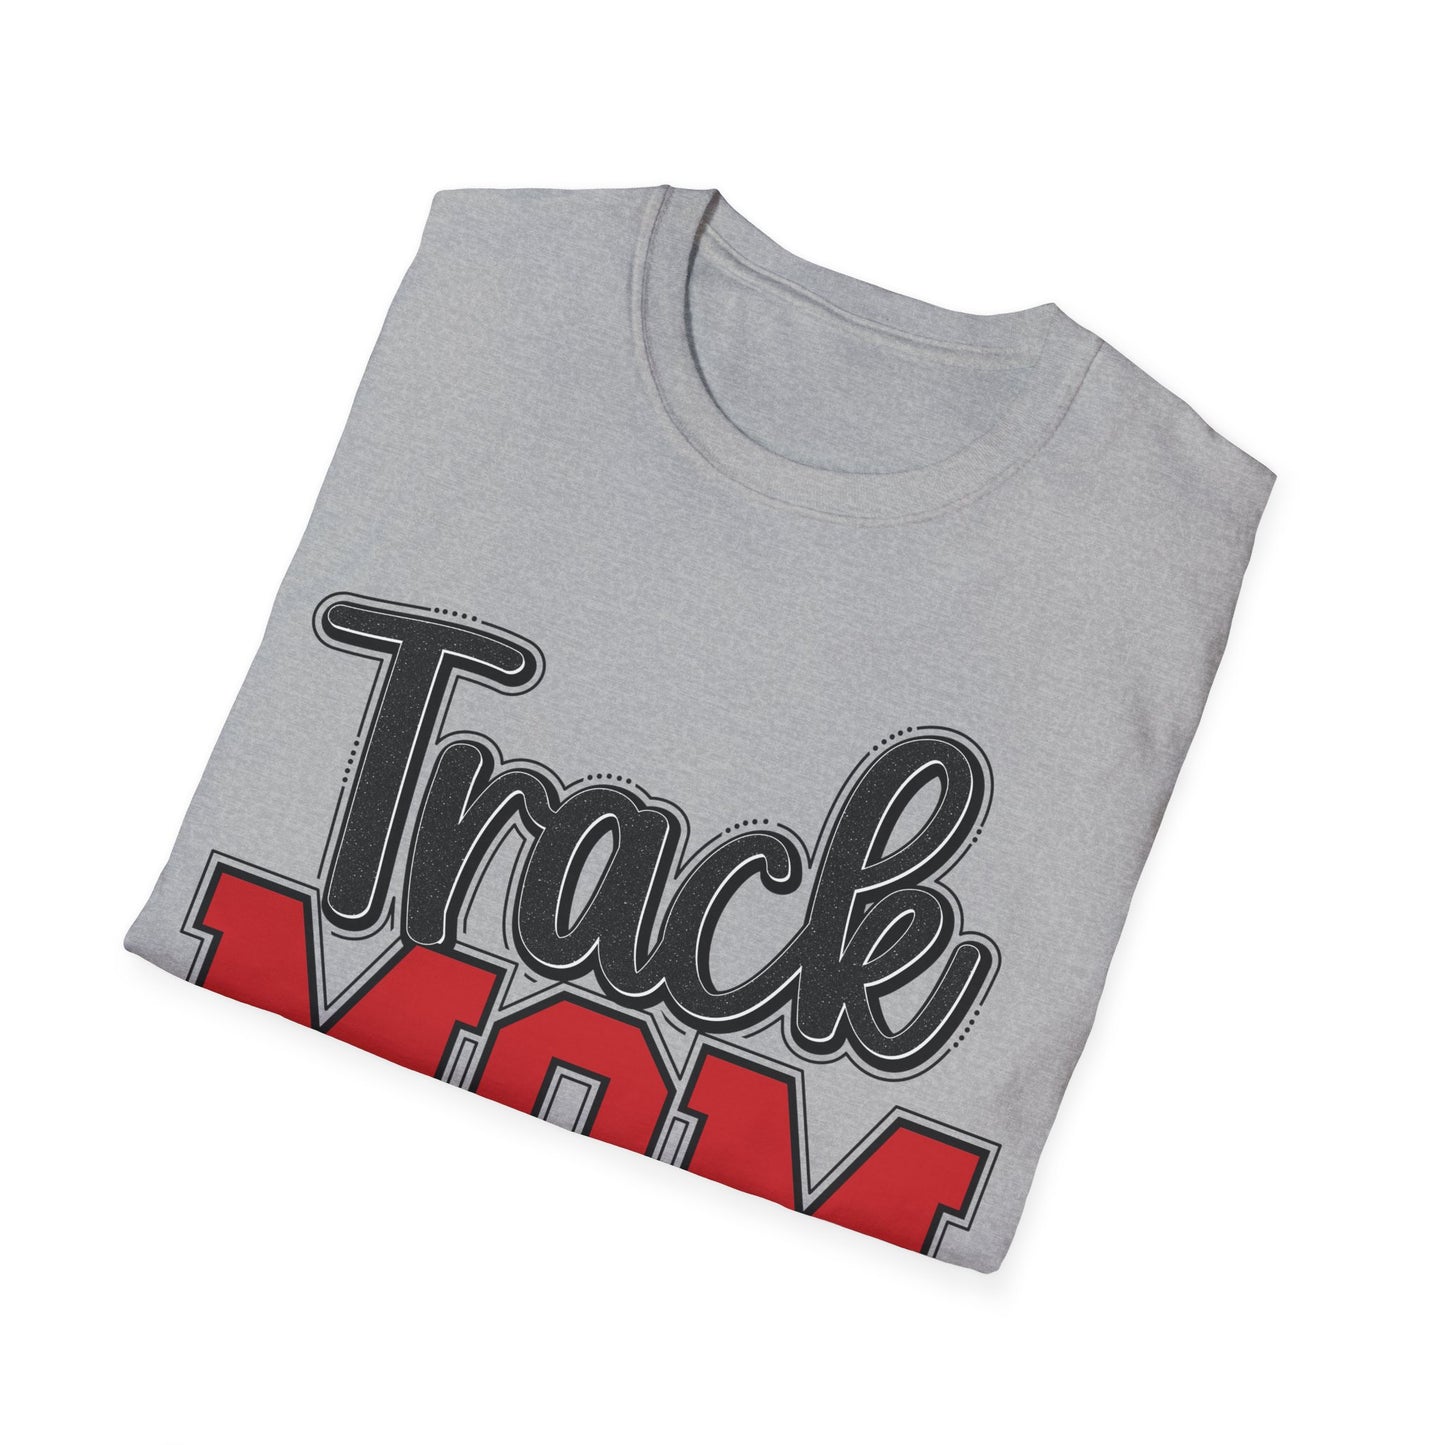 Unisex Softstyle T-Shirt -Track Mom Red